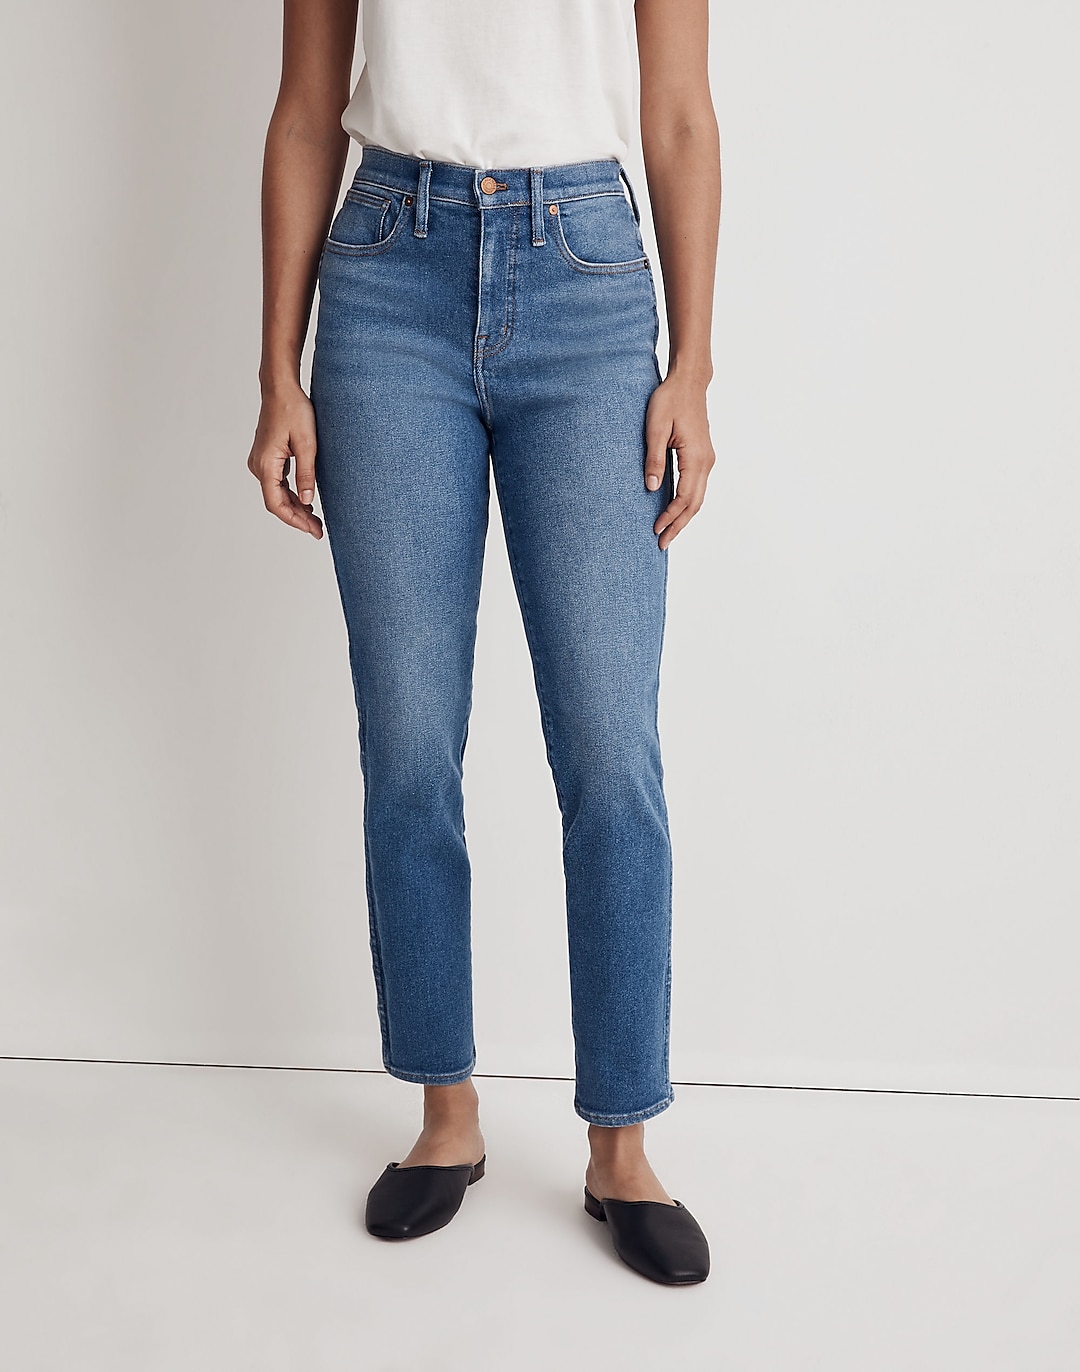 Stovepipe Jeans in Leaside Wash | Madewell